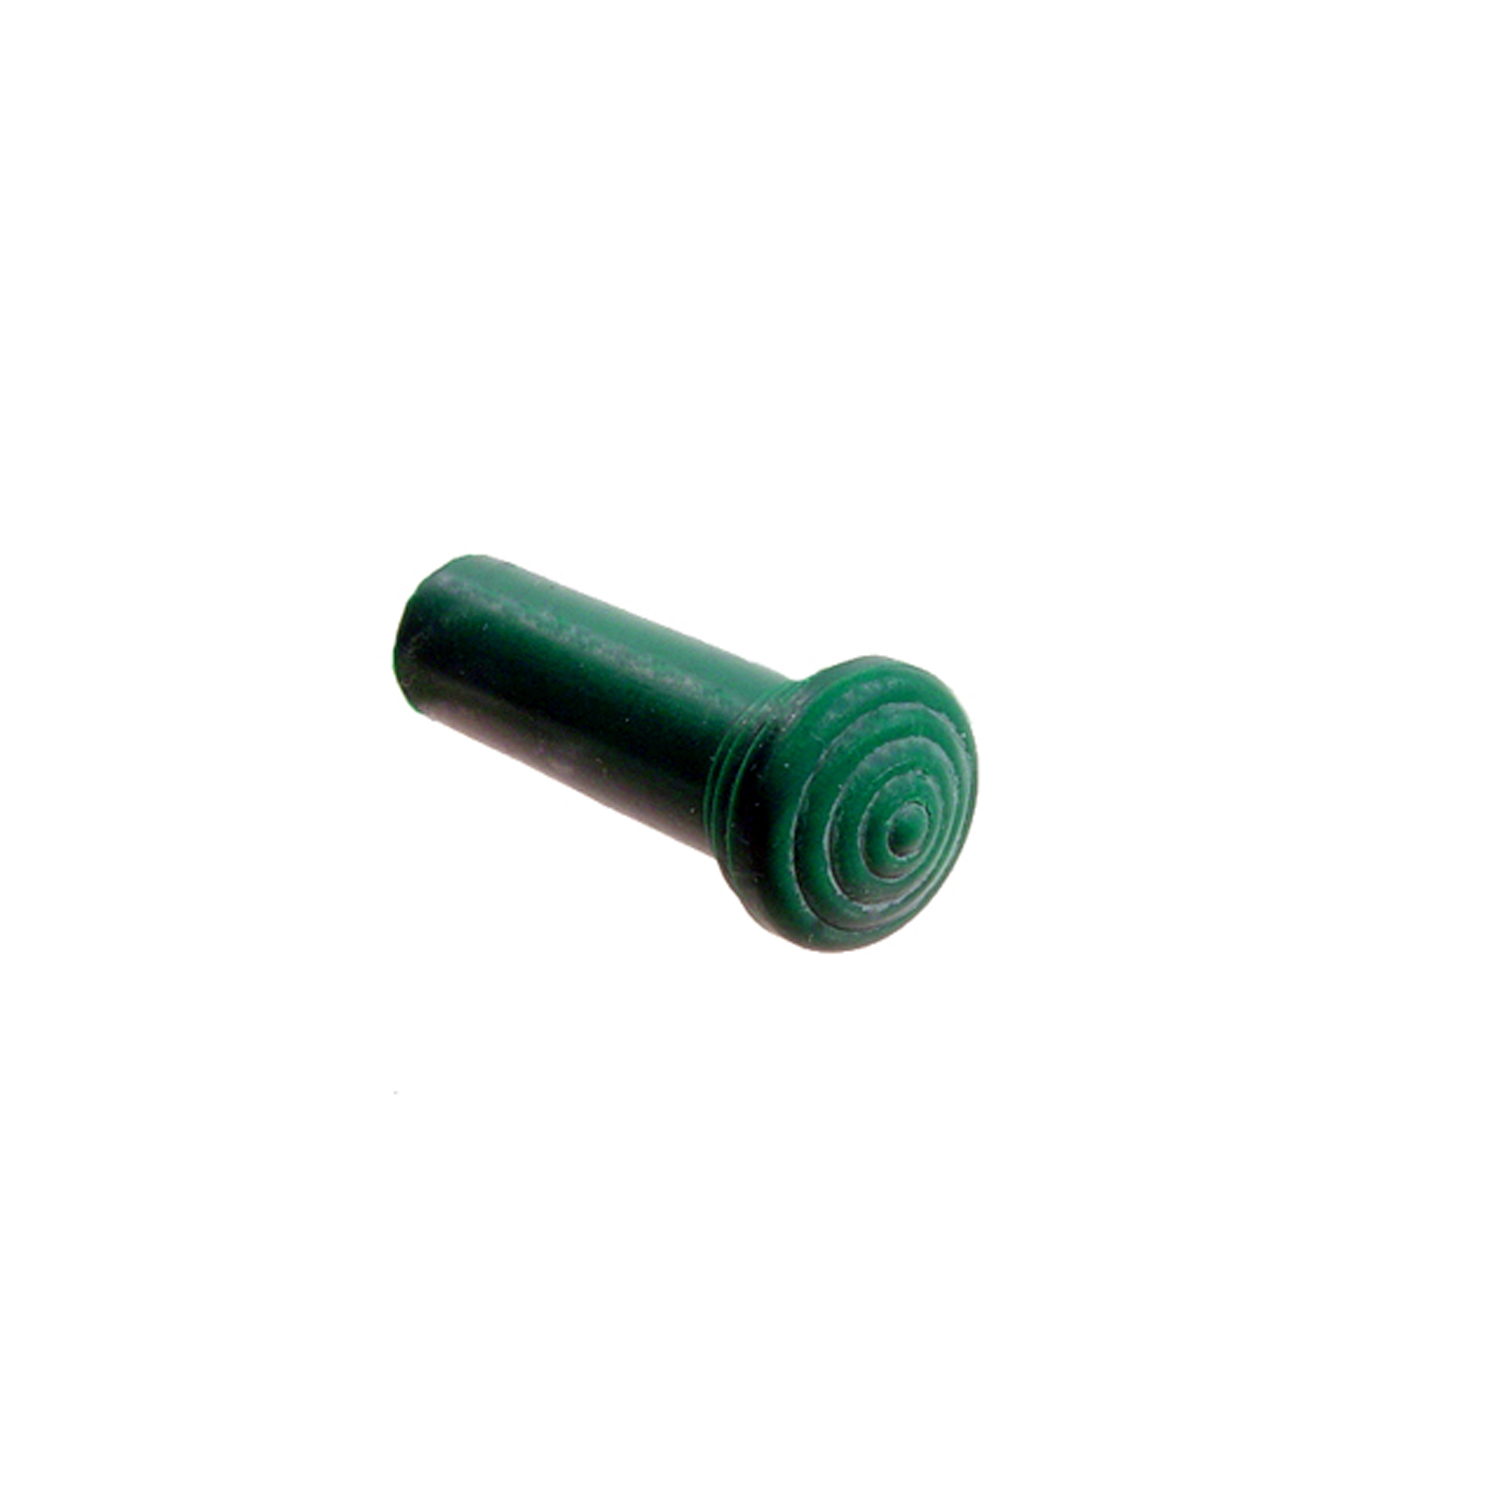 1941 Cadillac Series 60 Door Lock Knob.  Made of Teal Green rubber, self-threading-RP 304-M